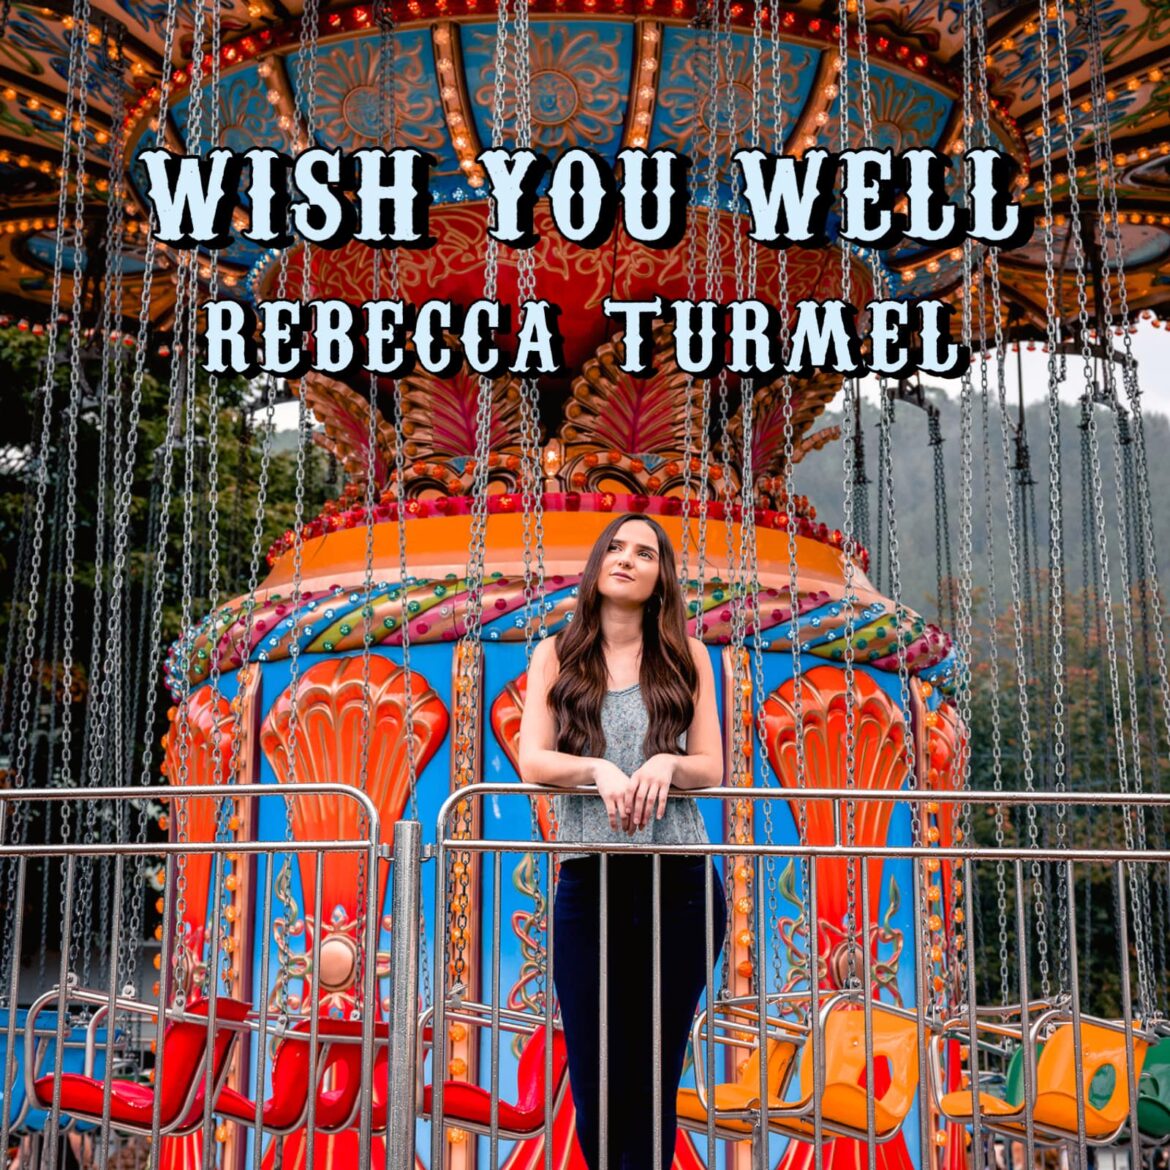 Acclaimed Singer-Songwriter Rebecca Turmel Releases Her Sophomore Single “Wish You Well”